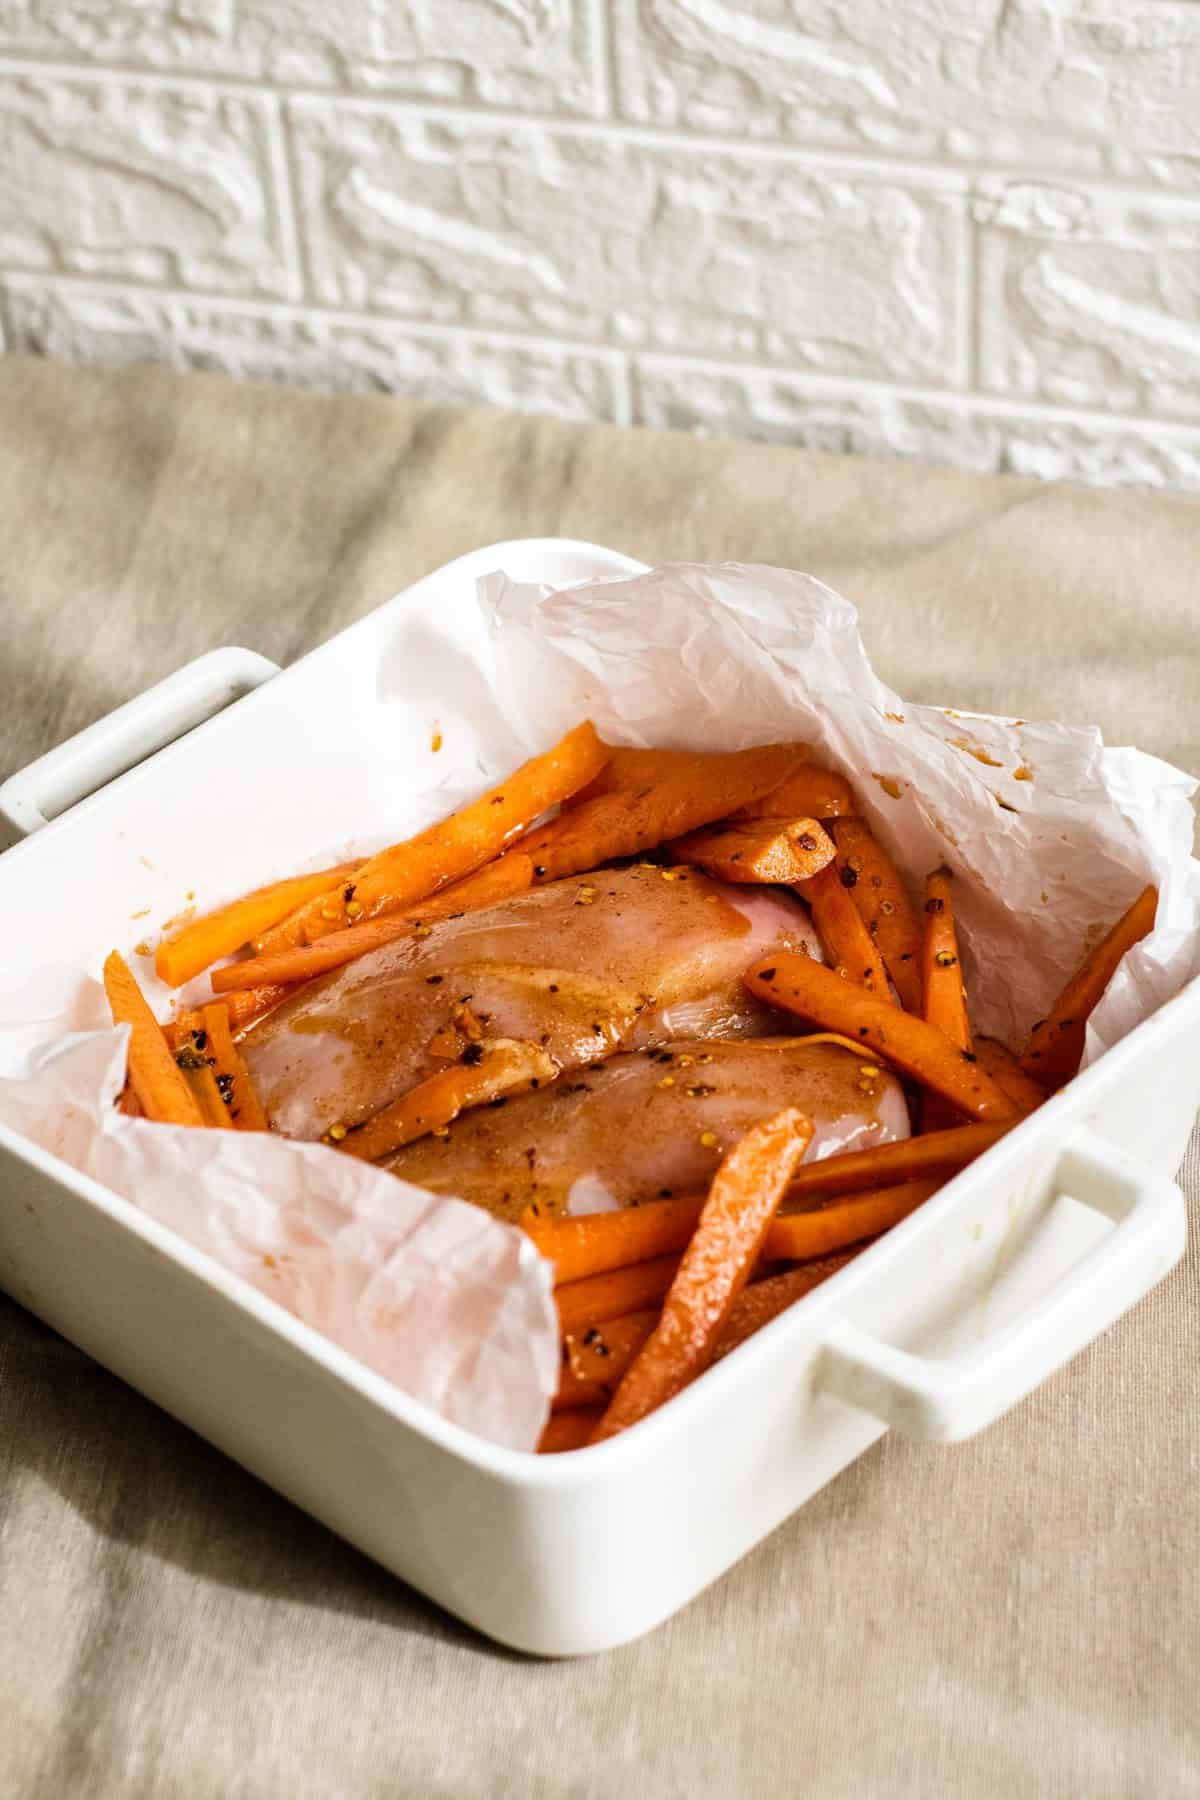 Chicken breasts and sliced carrots coated in a spicy sauce and placed in a lined baking dish ready to bake